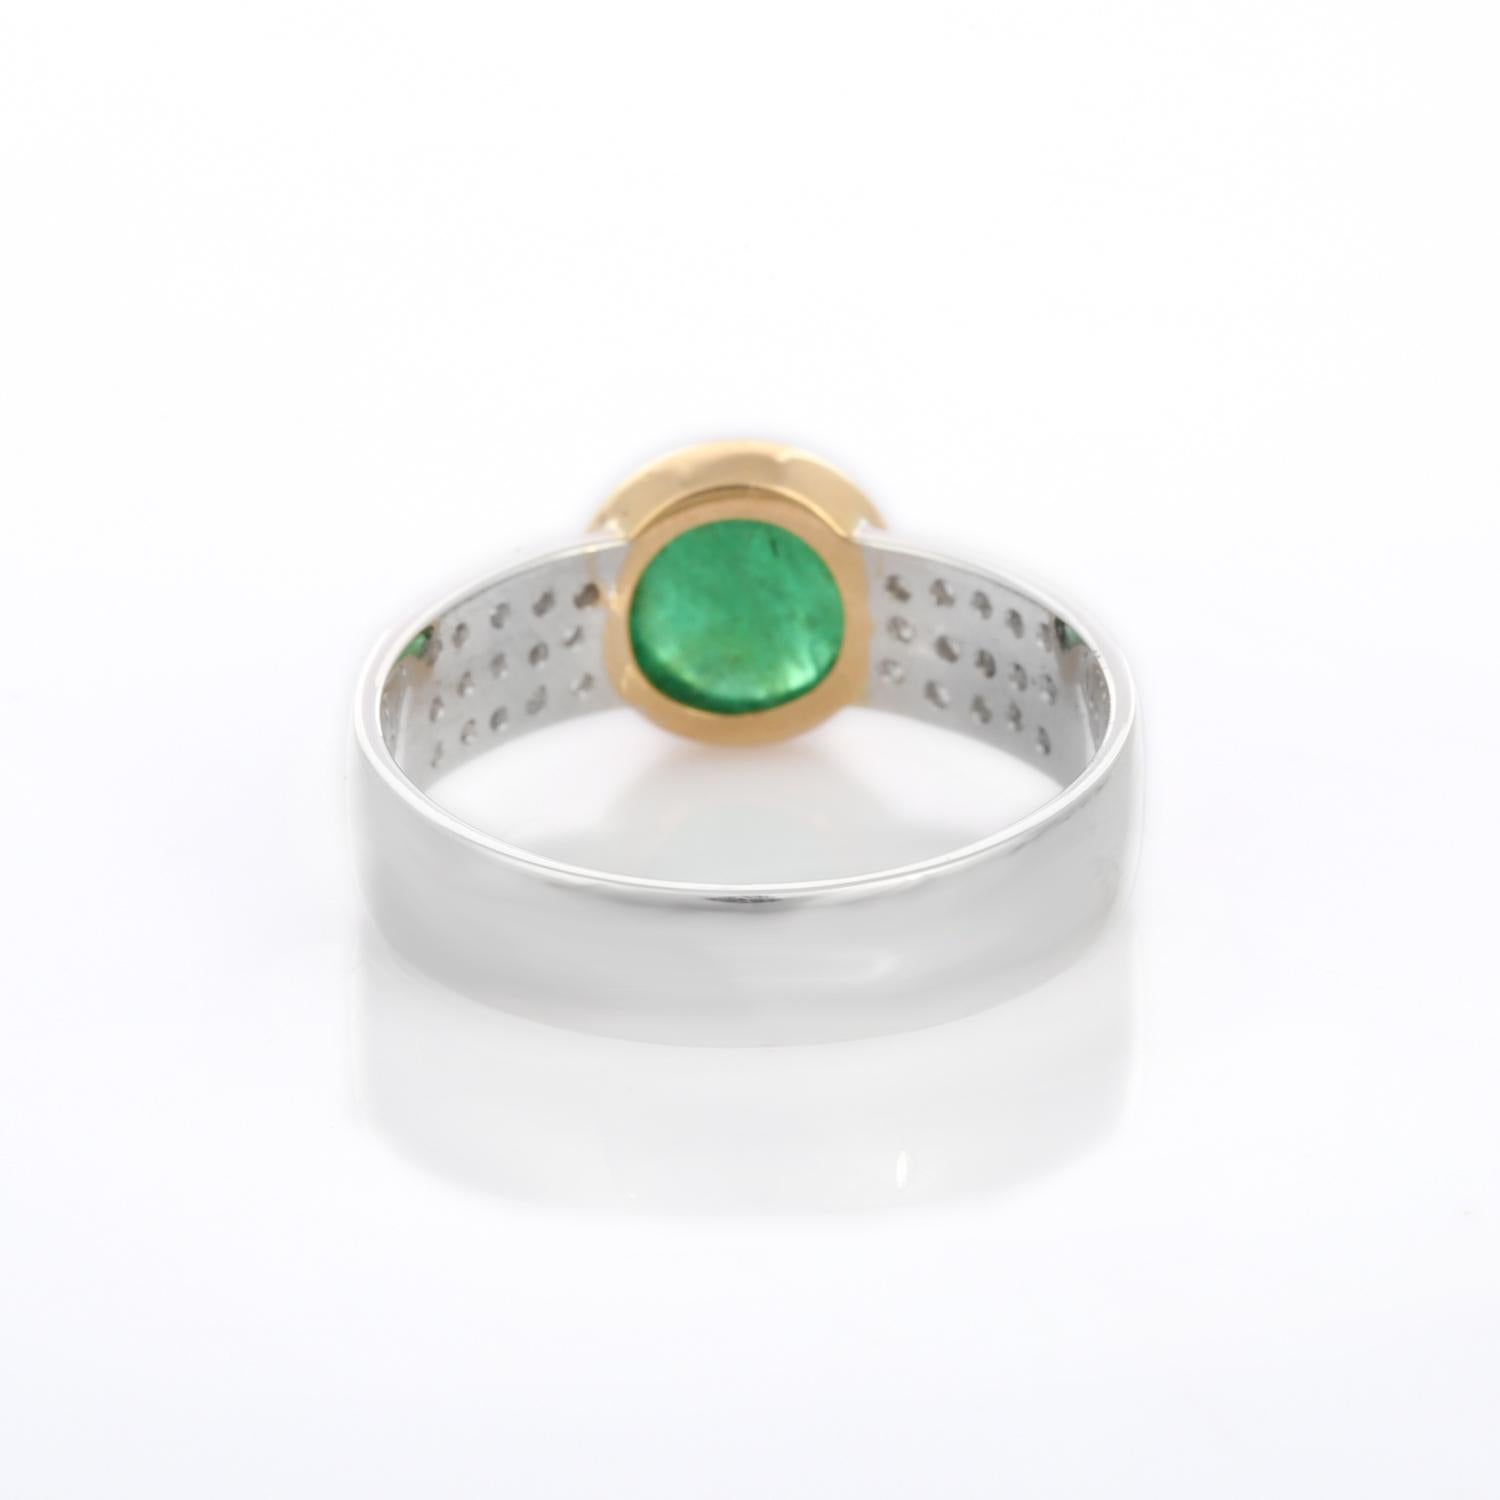 For Sale:  1.72 Carat Emerald and Diamond Ring in 18K White Gold  5